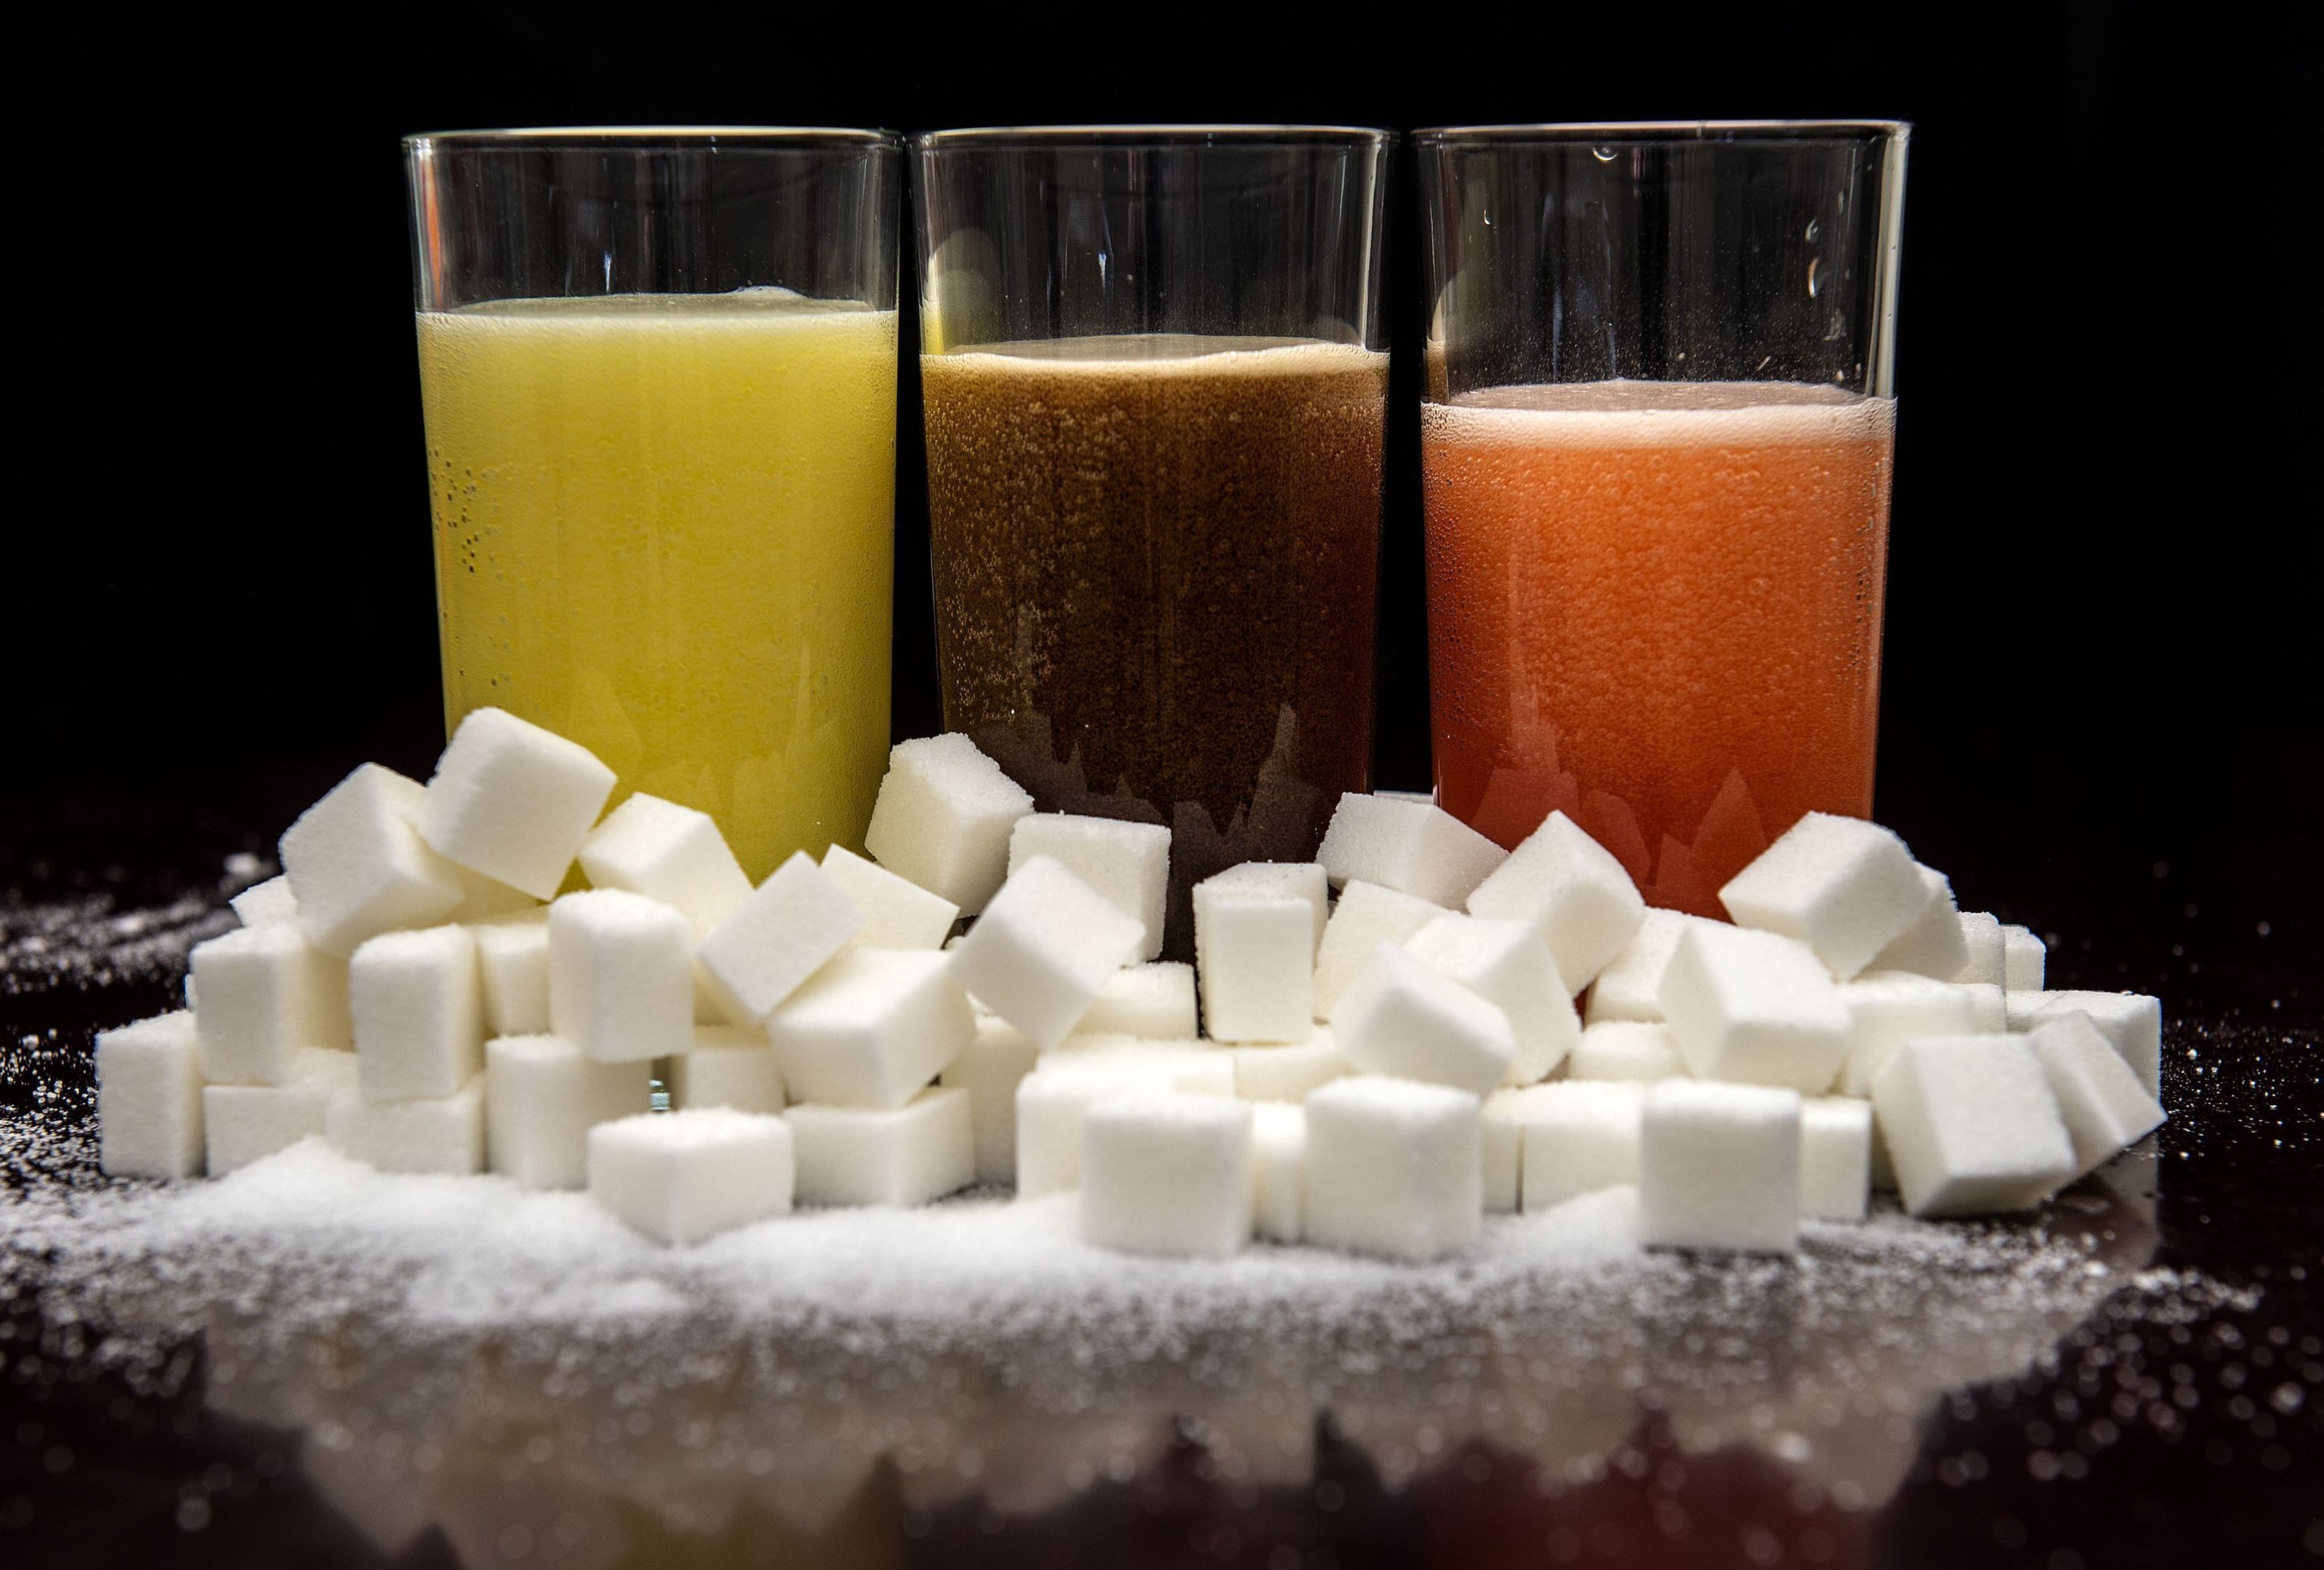 Sugar and fizzy drinks